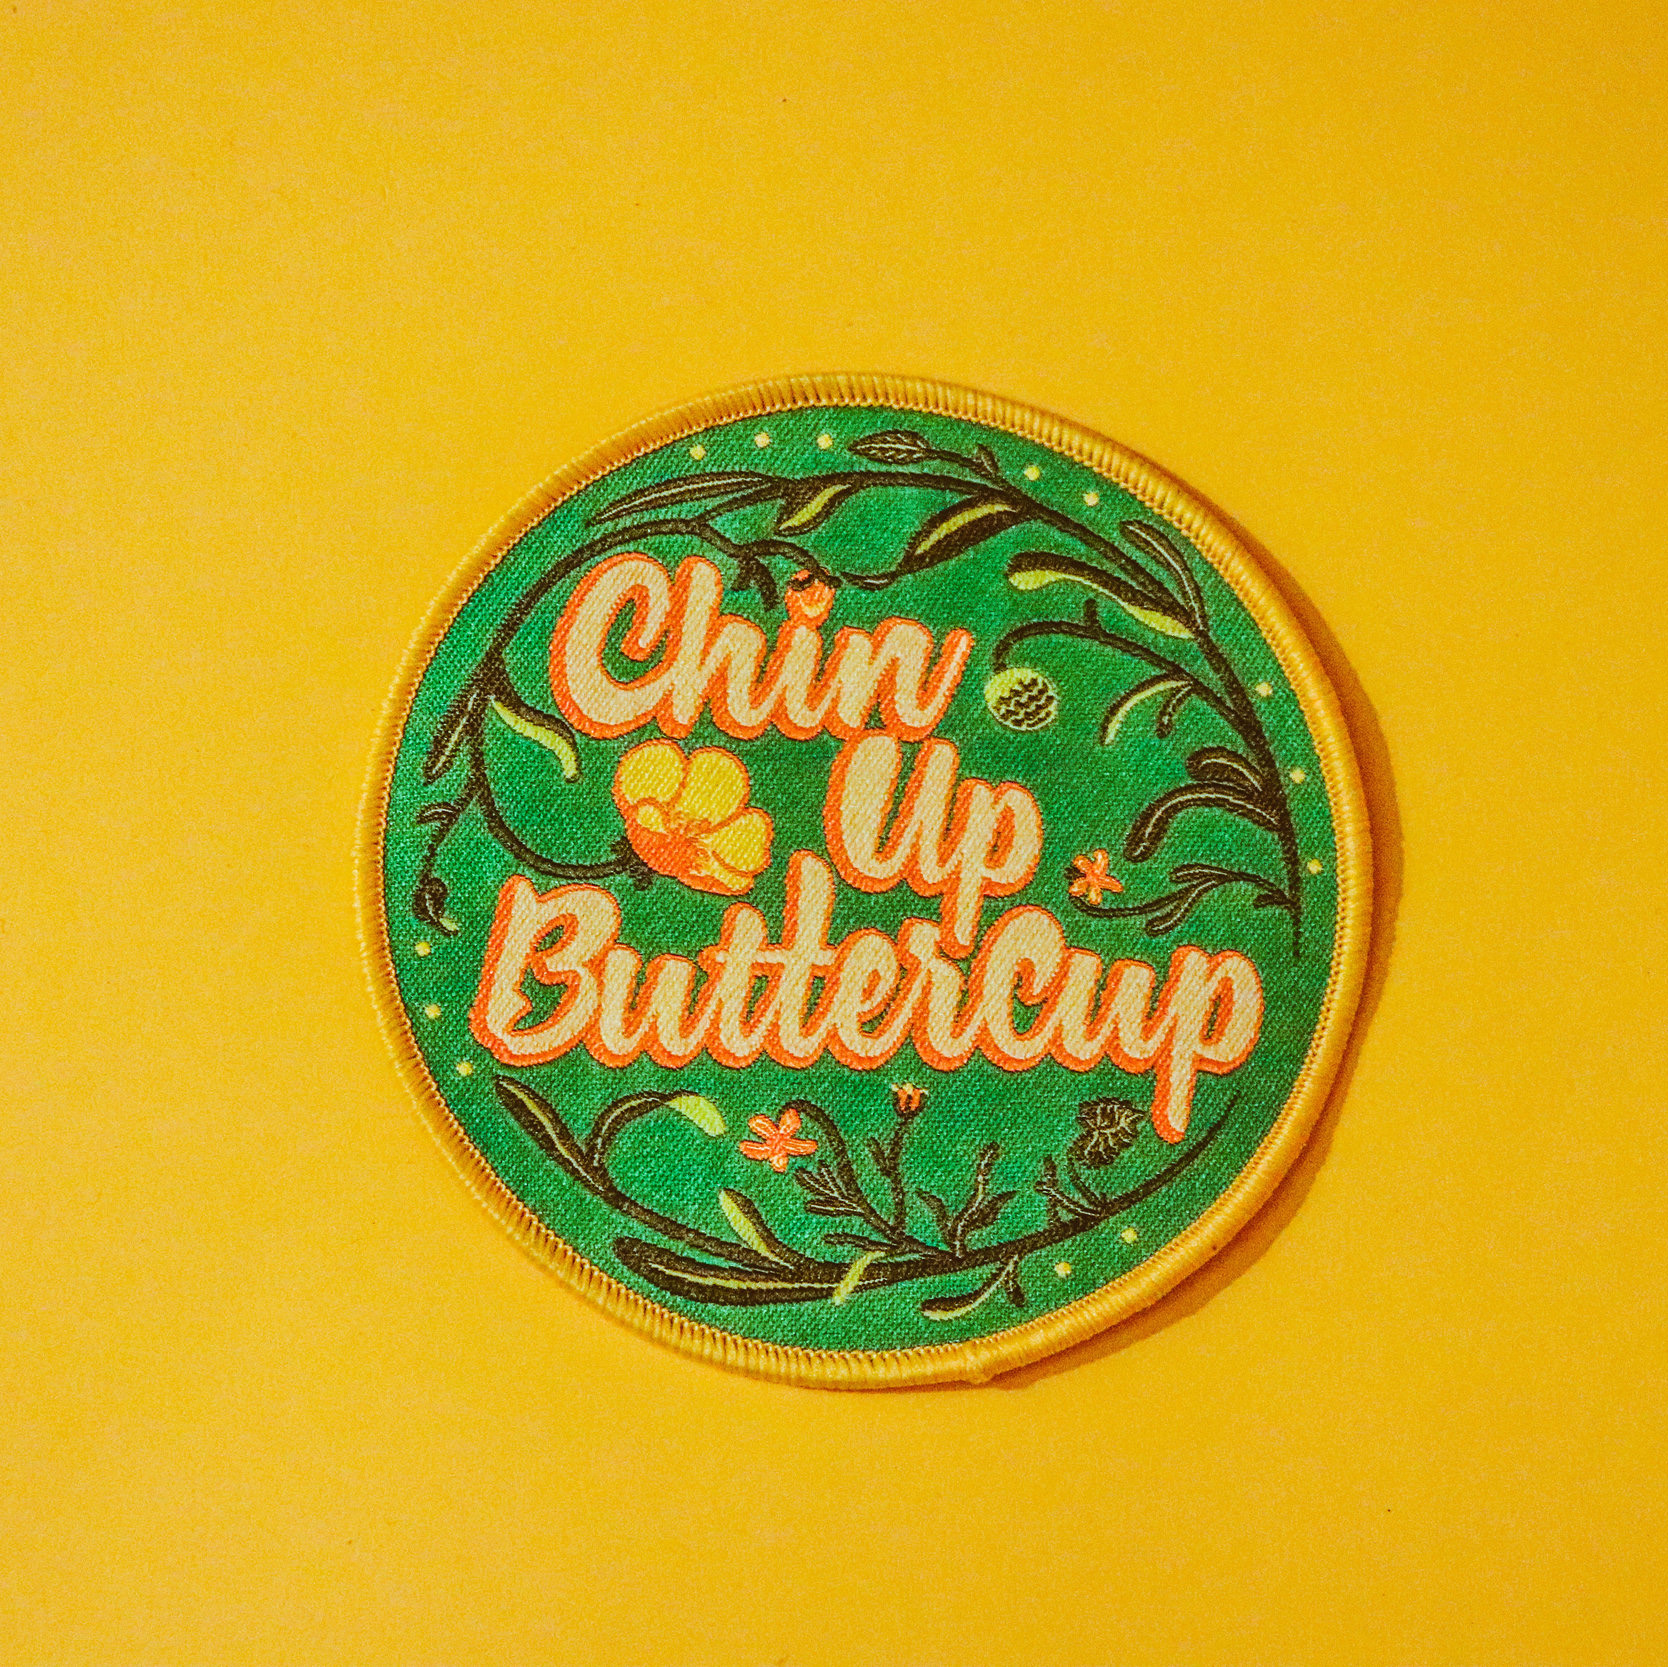 Chin Up Buttercup patch